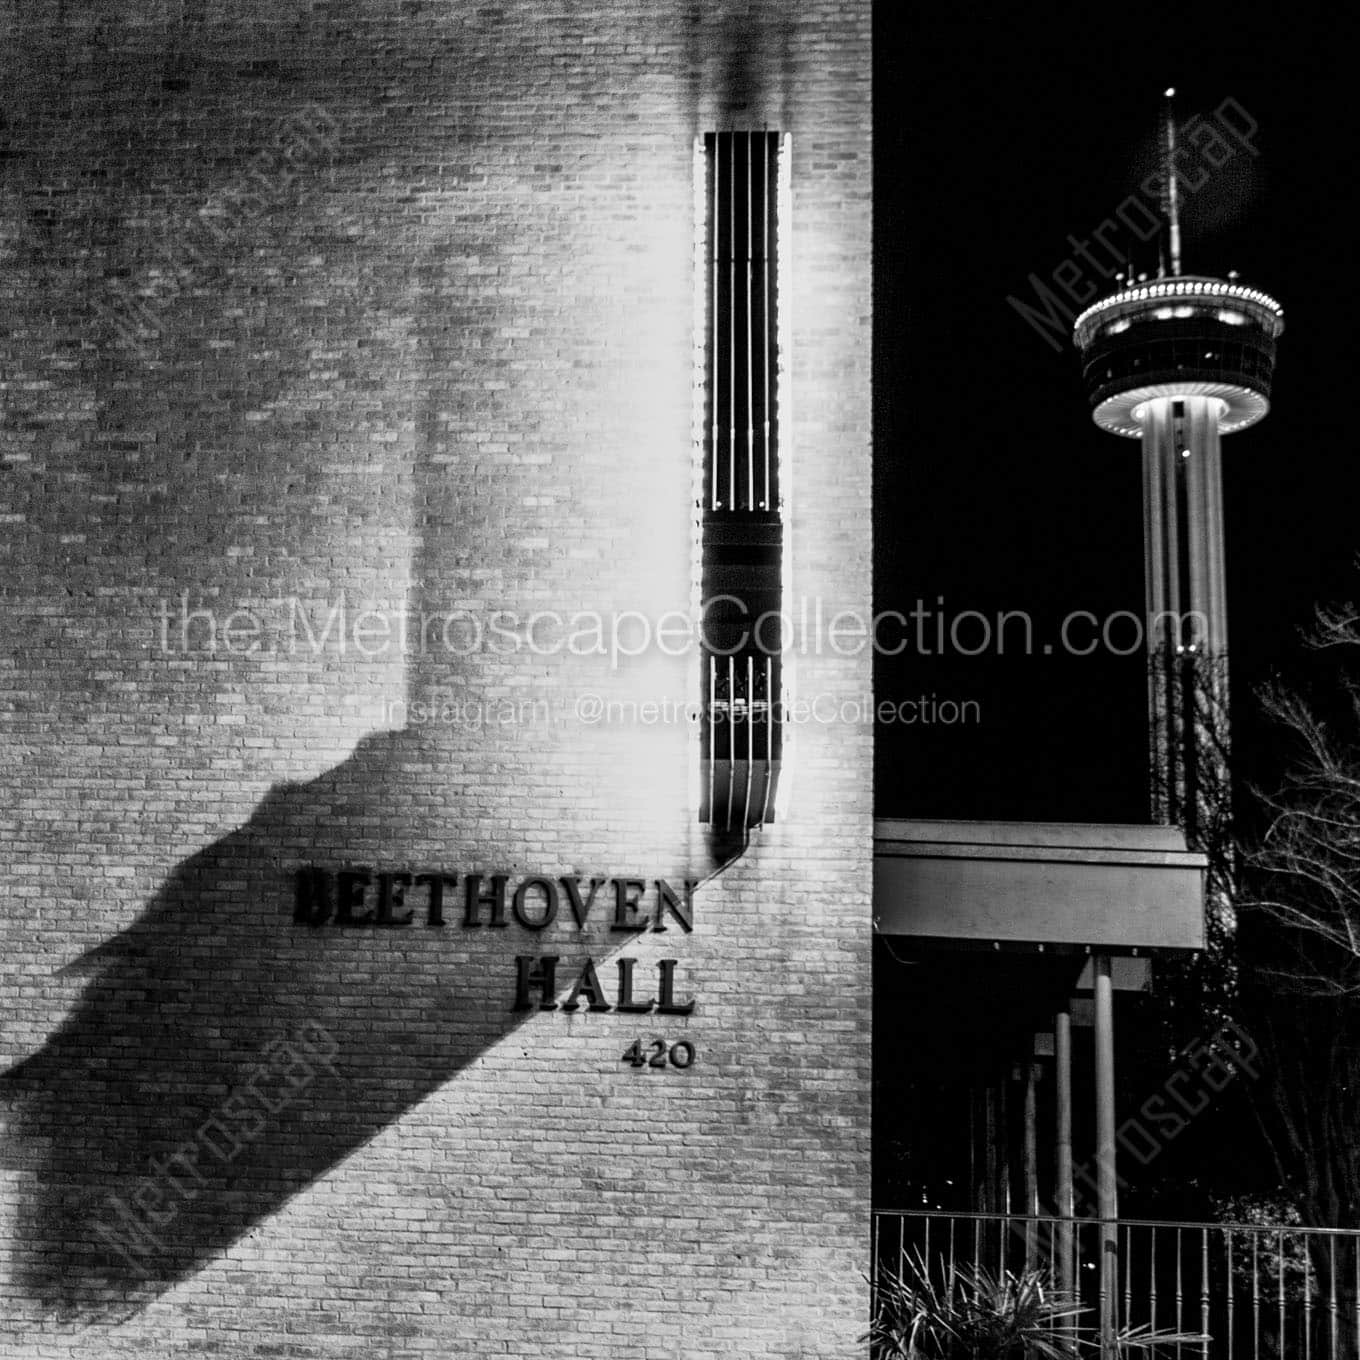 beethoven hall tower americas Black & White Office Art